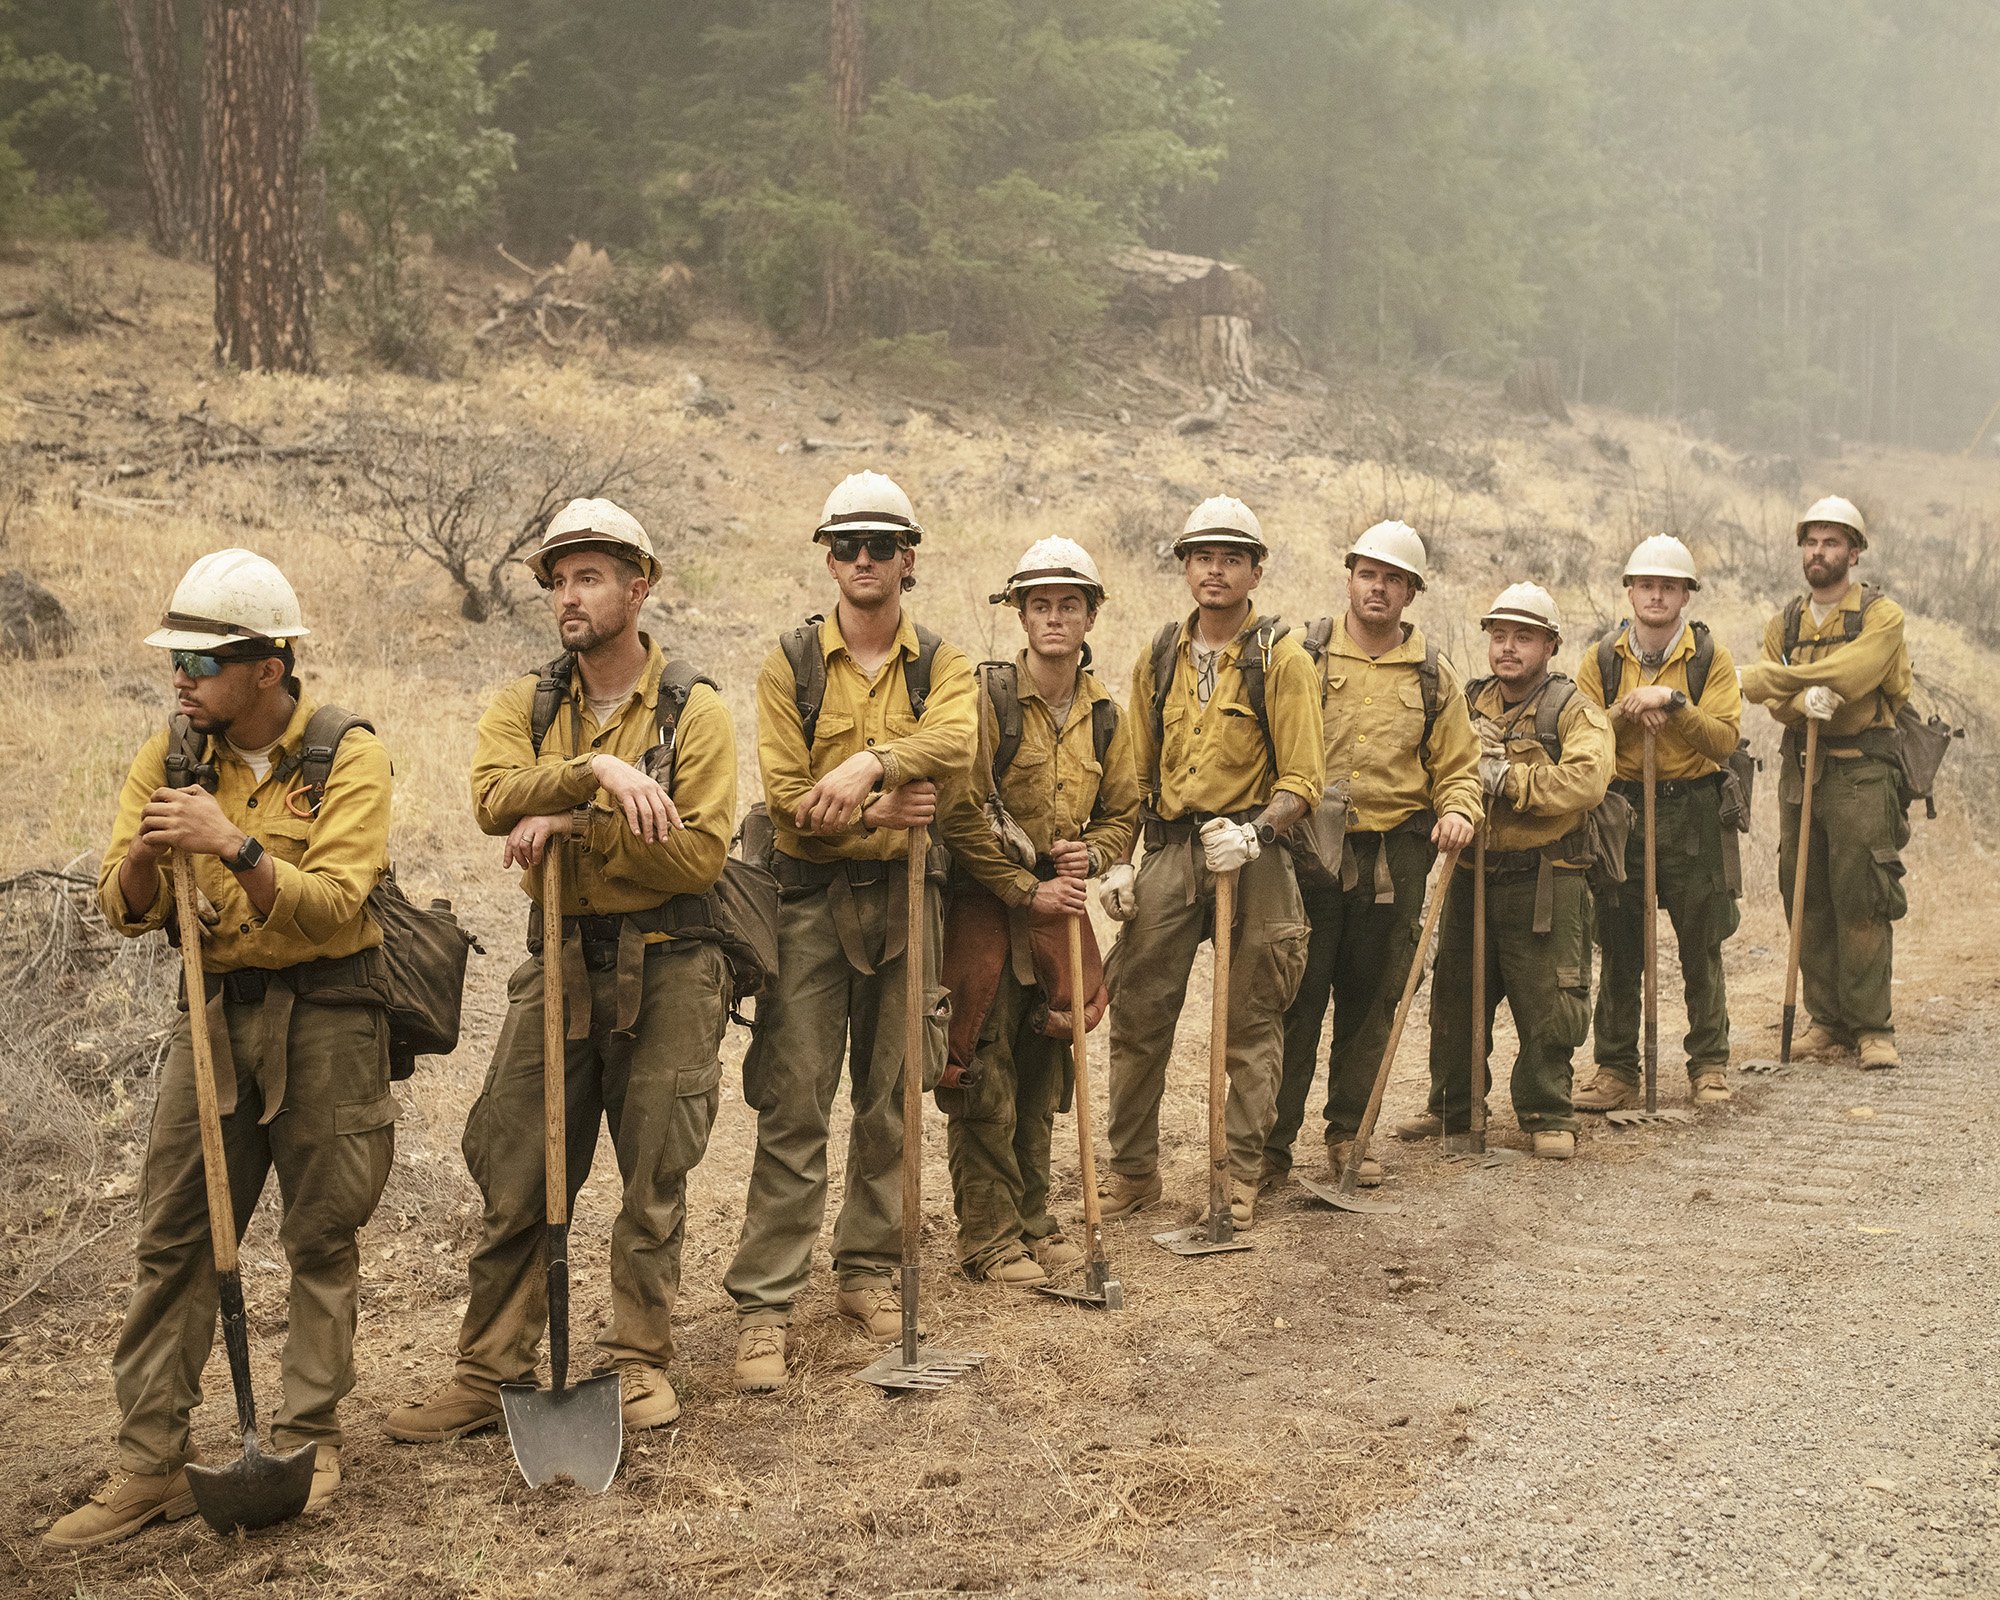  Firefighters fighting the Dixie Fire, the largest single fire in California's history, on July 25, 2021. The blaze, which started on July 13, had burned more than 554,000 acres by Aug. 15 and was only 31% contained. Crescent Mills, California. For  